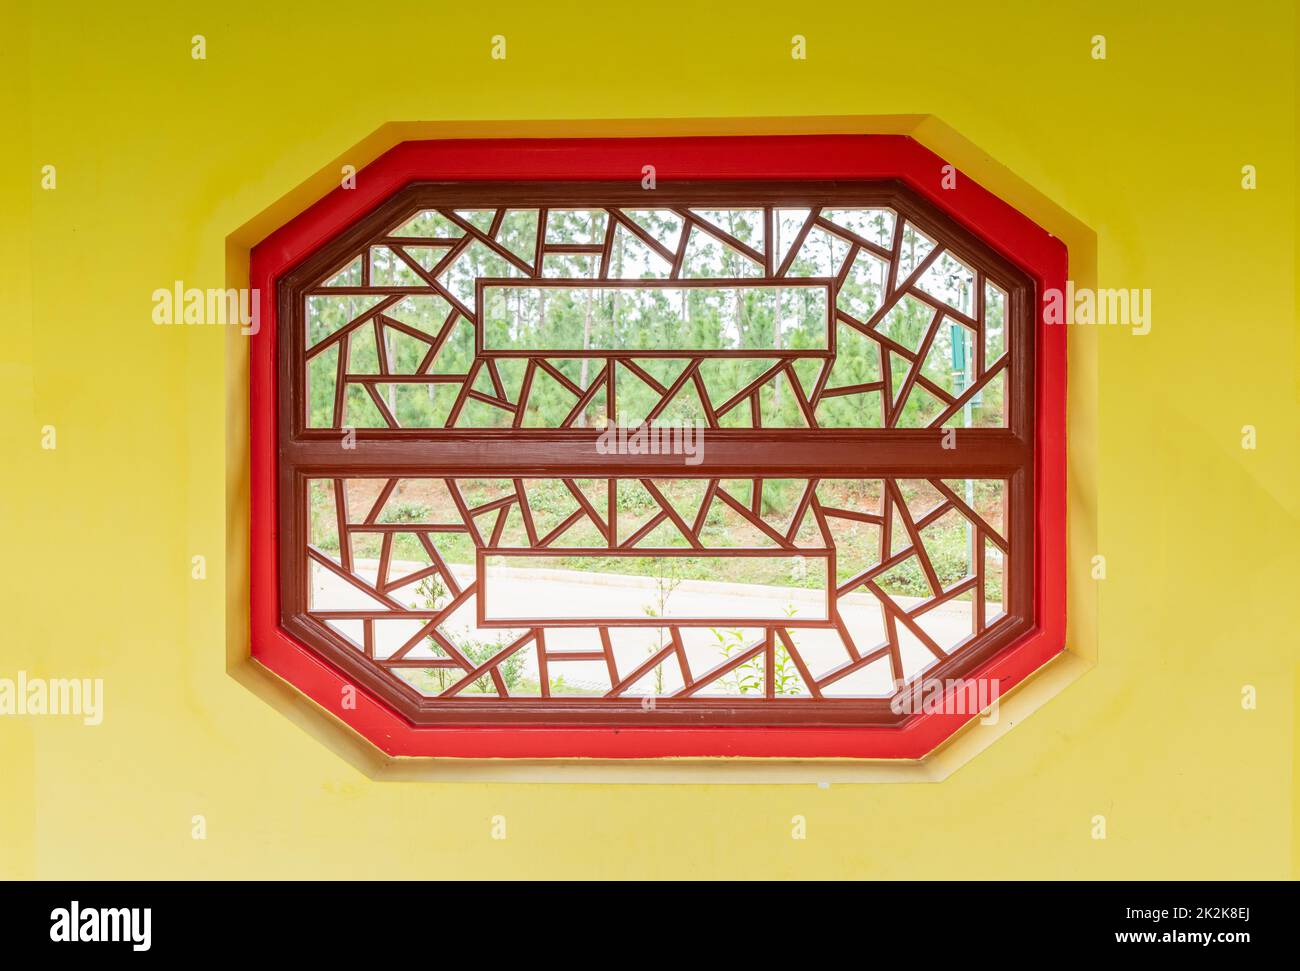 Chinese window of Confucius Culture City, Suixi County, Guangdong Province, China Stock Photo